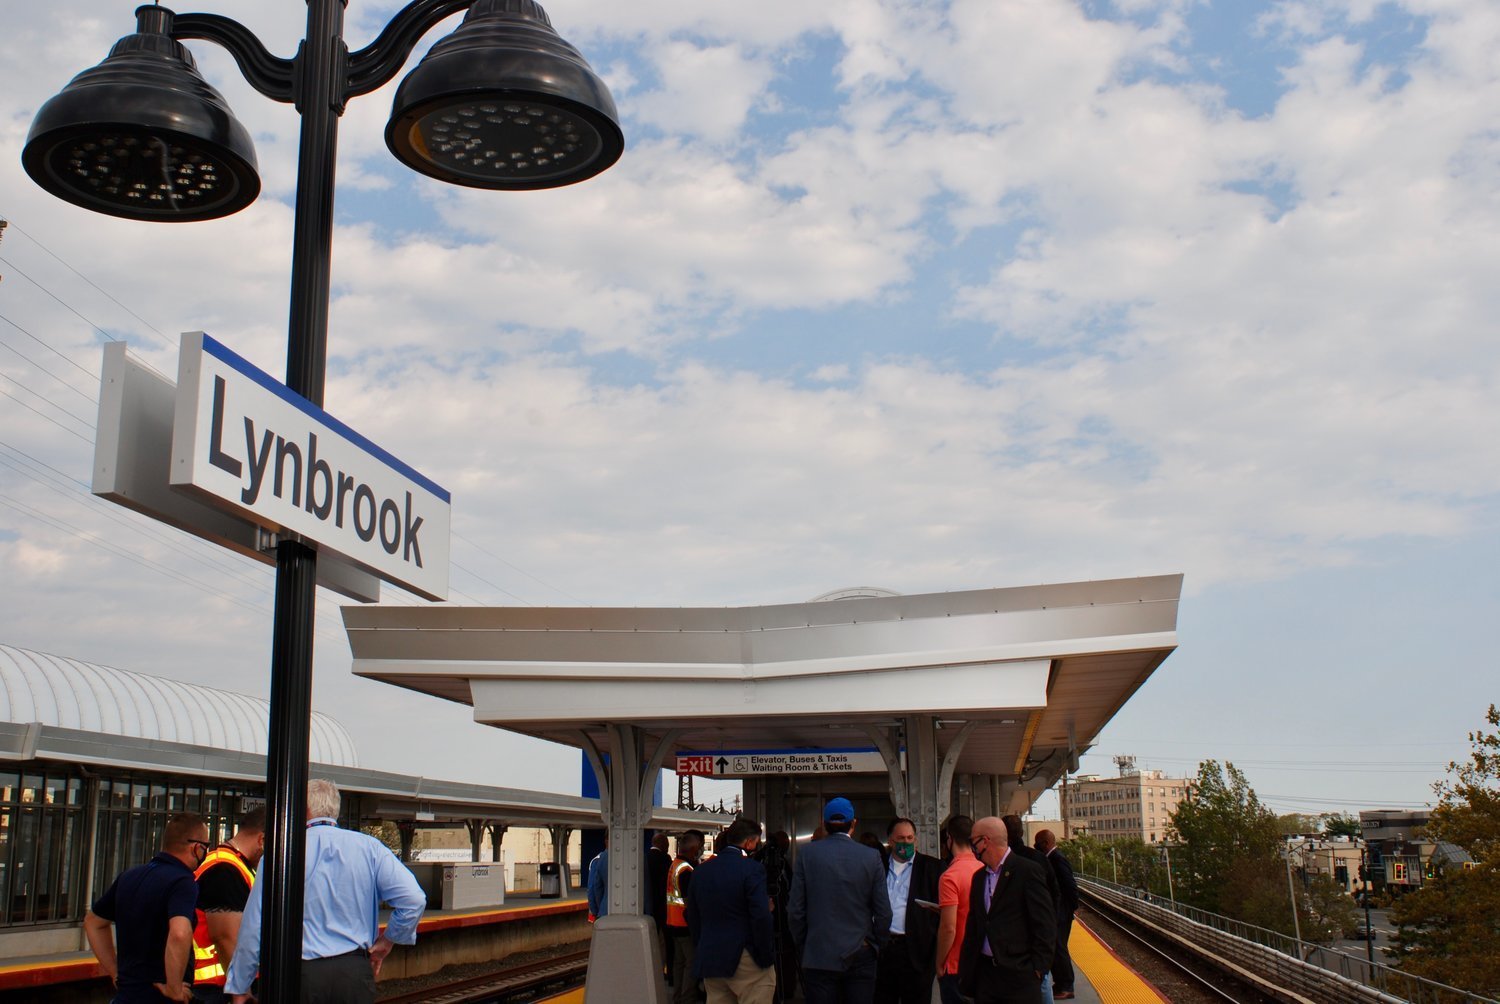 Officials lauded the completion of the revamped Lynbrook Long Island Rail Road station in October, but they are now pushing to finish improvements there and at the East Rockaway and Centre Avenue stations.